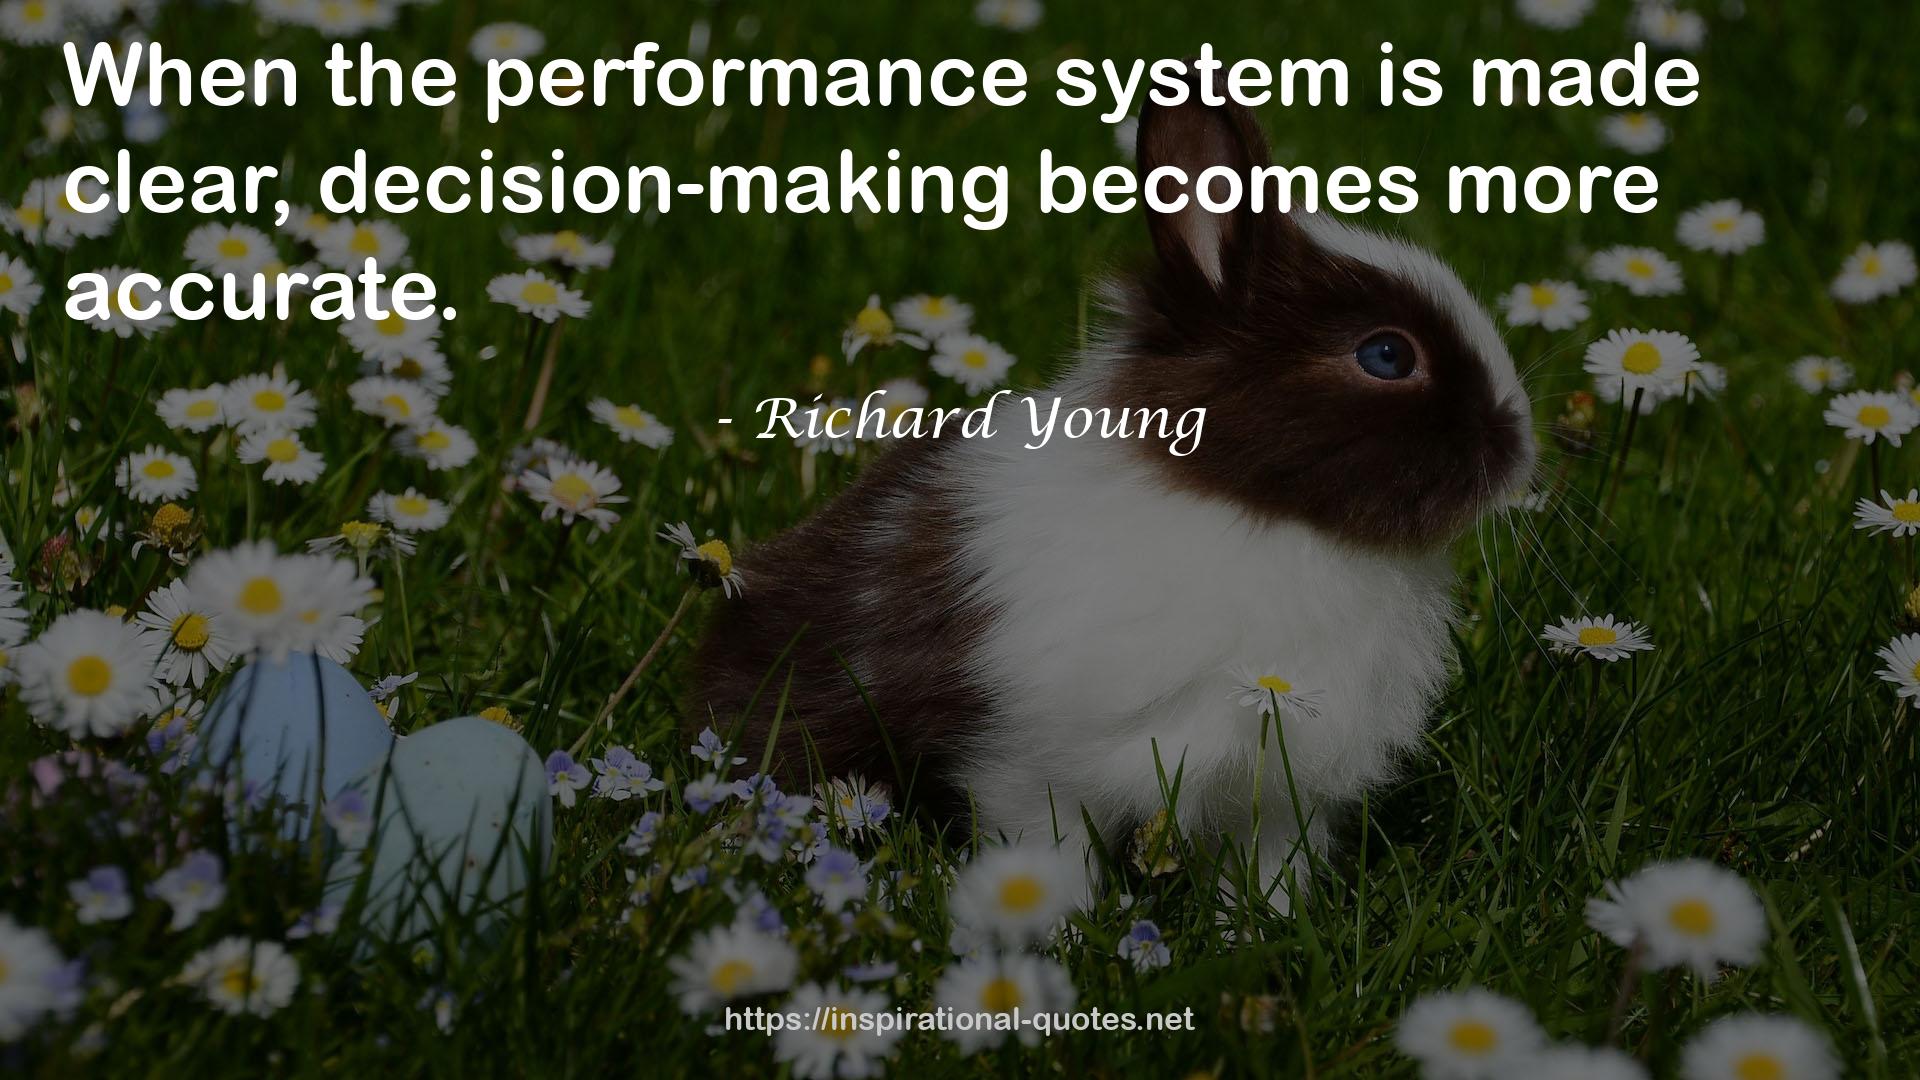 Richard Young QUOTES